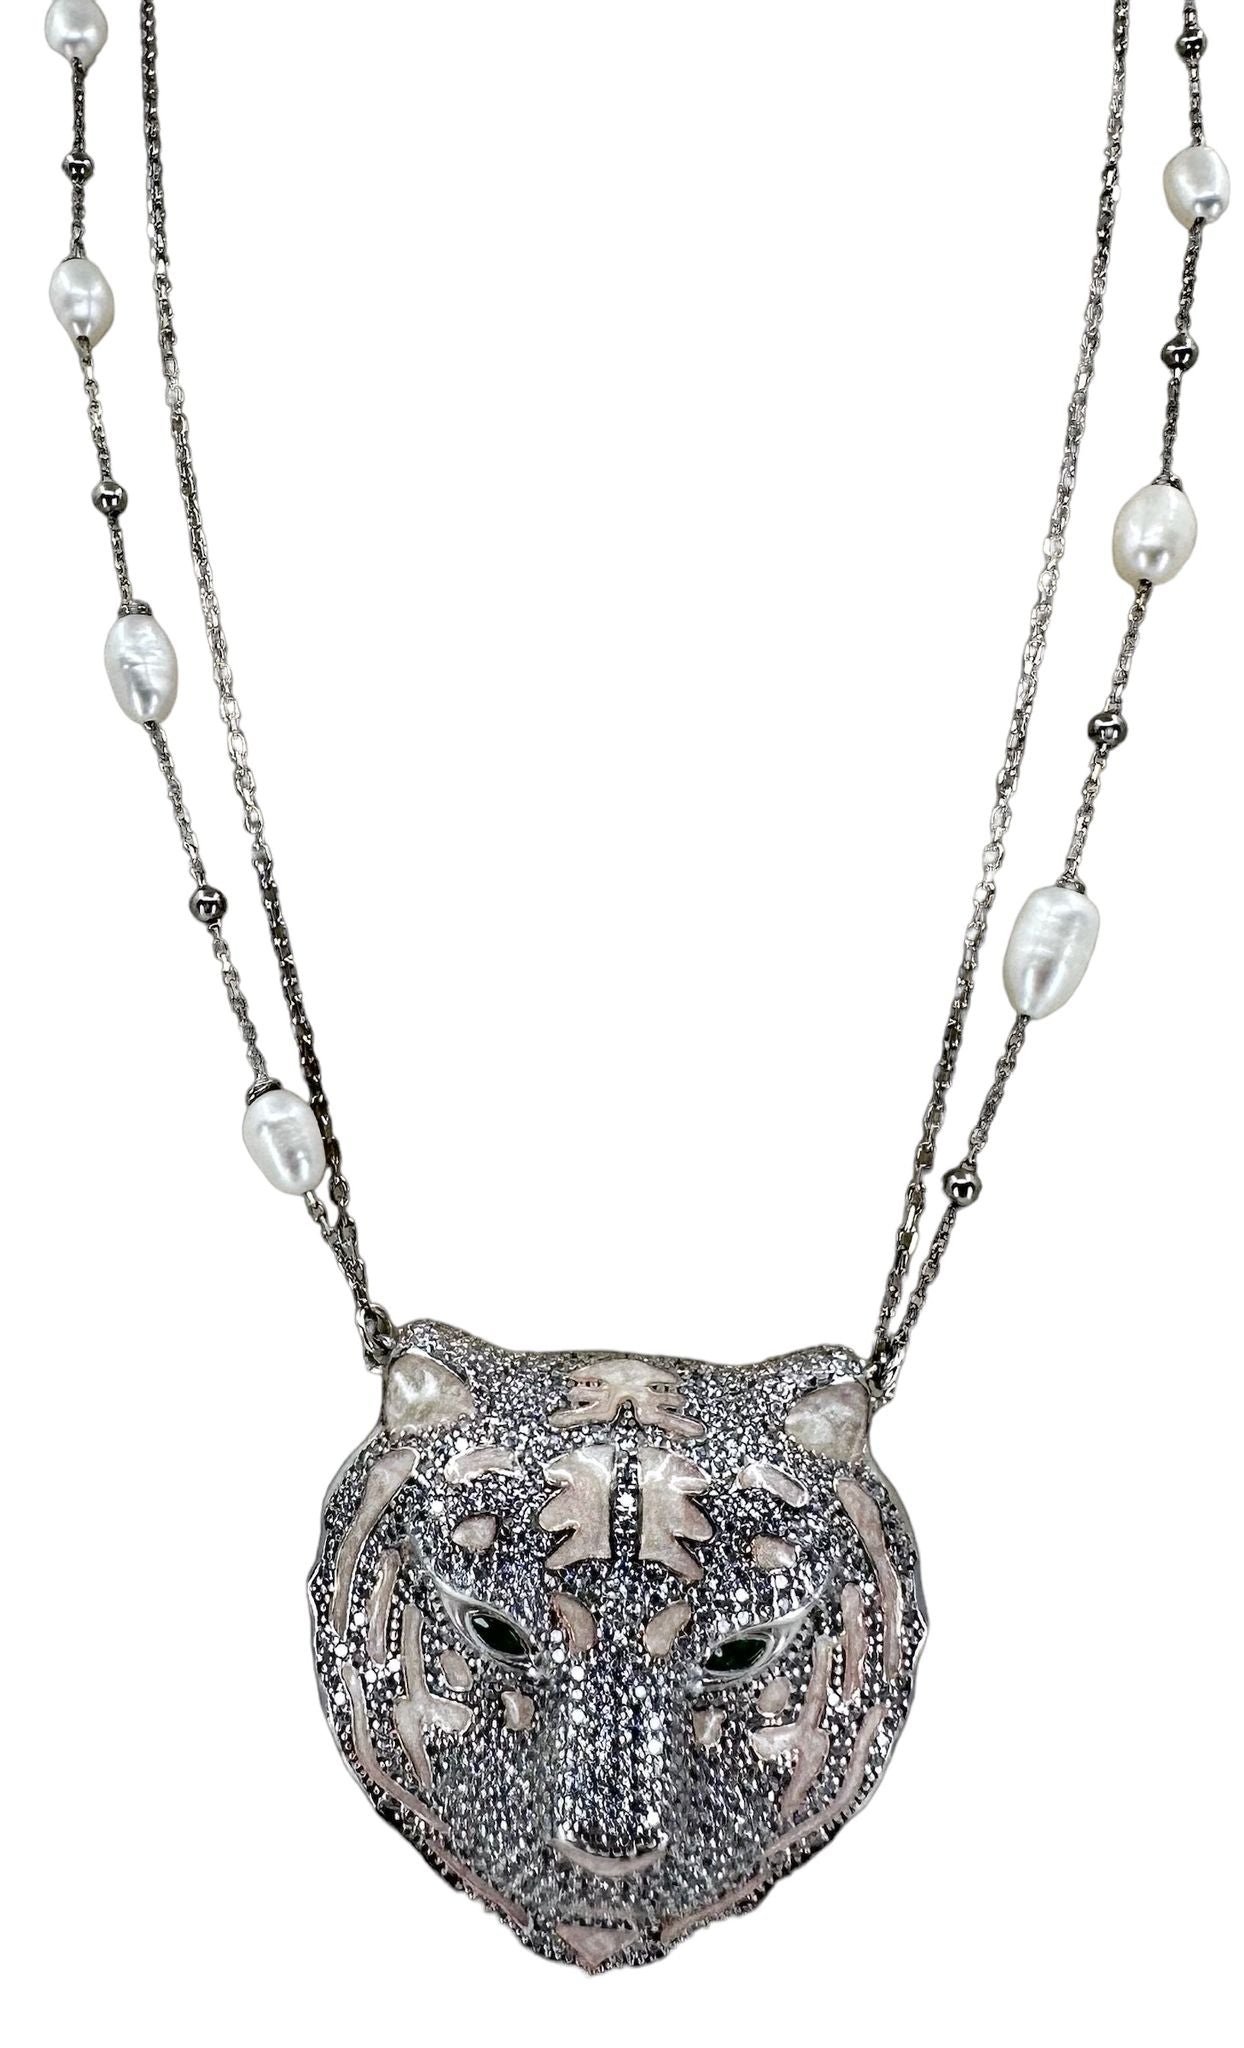 Bengal Tiger Necklace